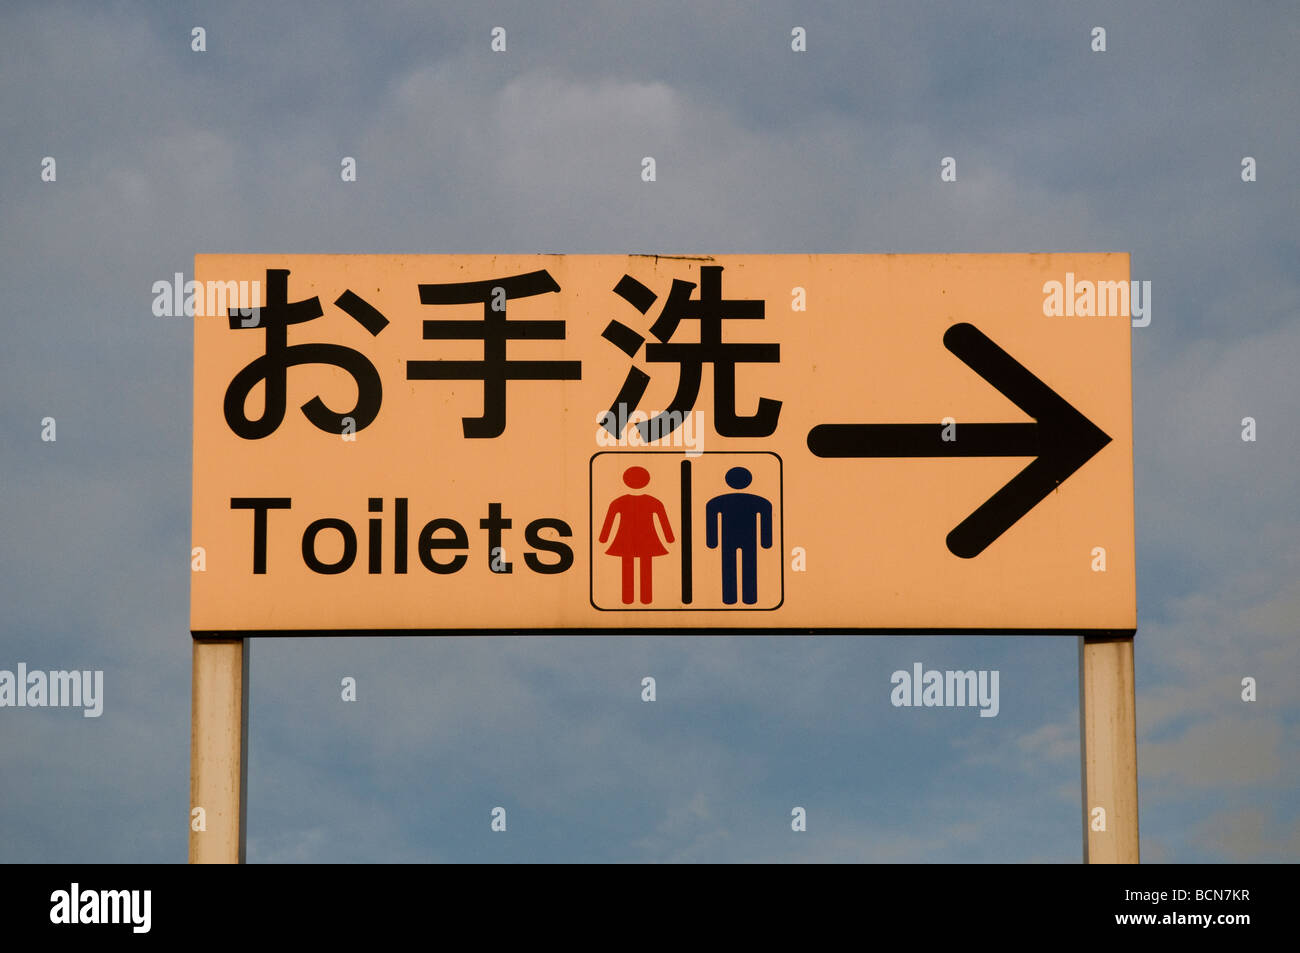 Toilets signboard in Japanese and English Tokyo Japan Stock Photo